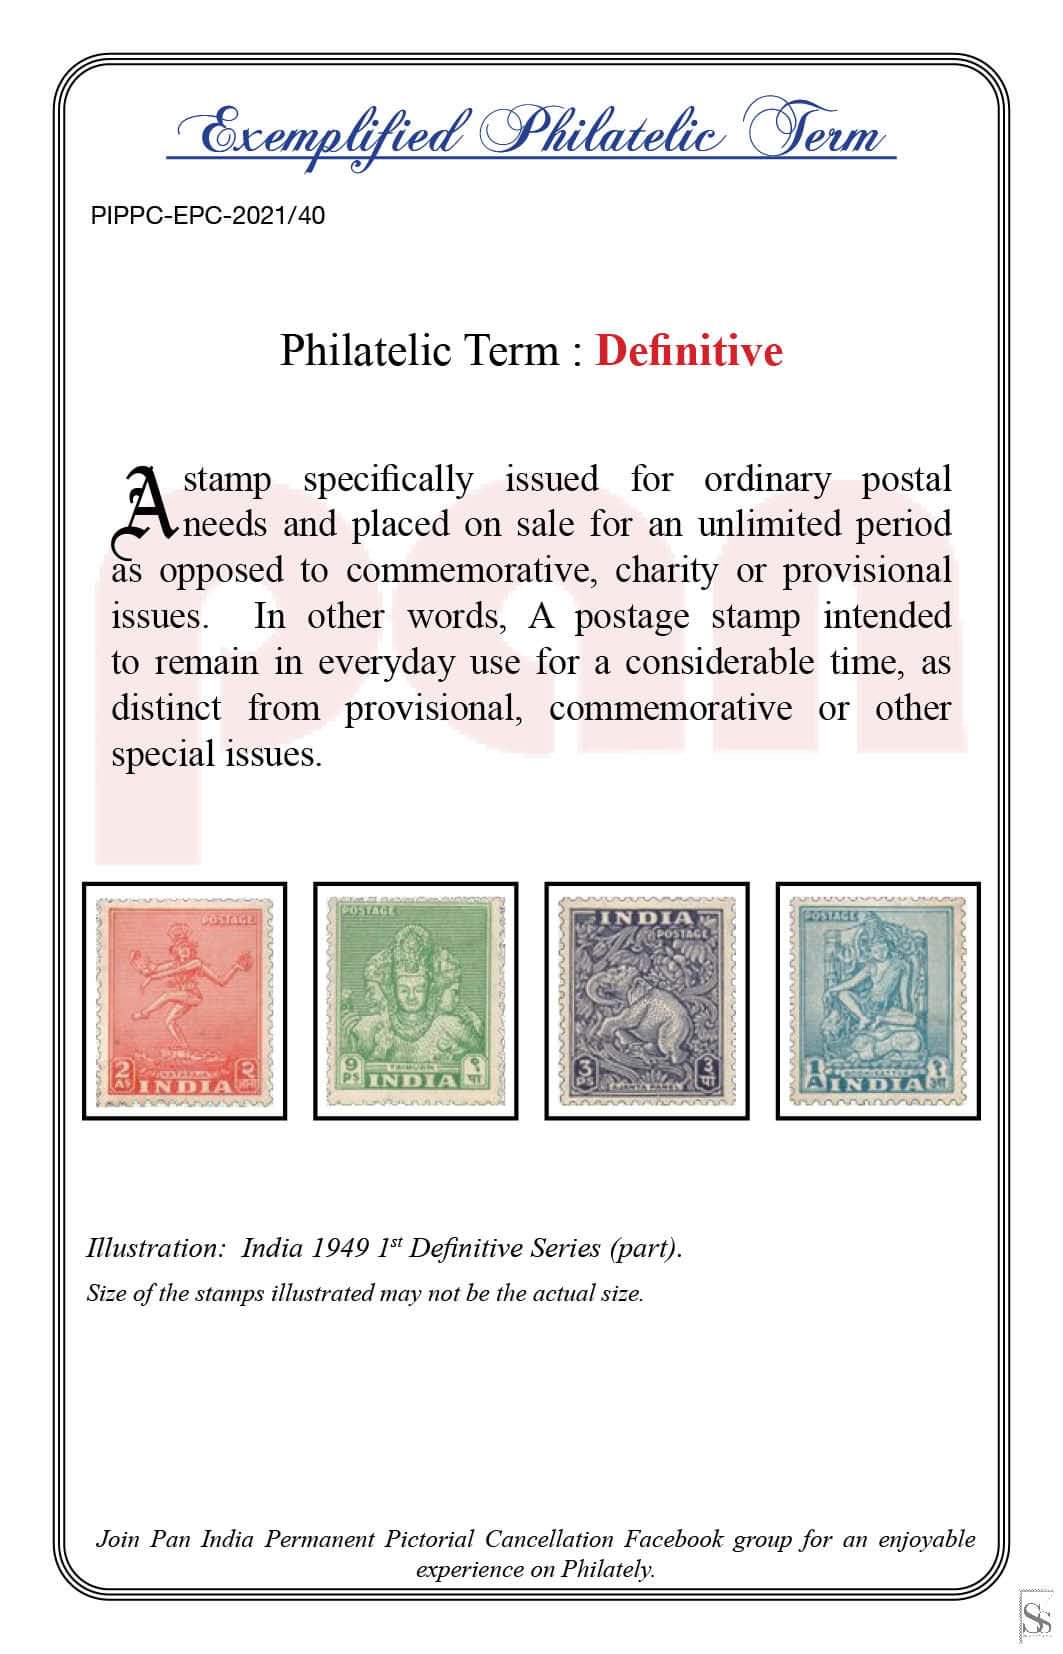 40. Today's Exemplified Philatelic term-Definitive